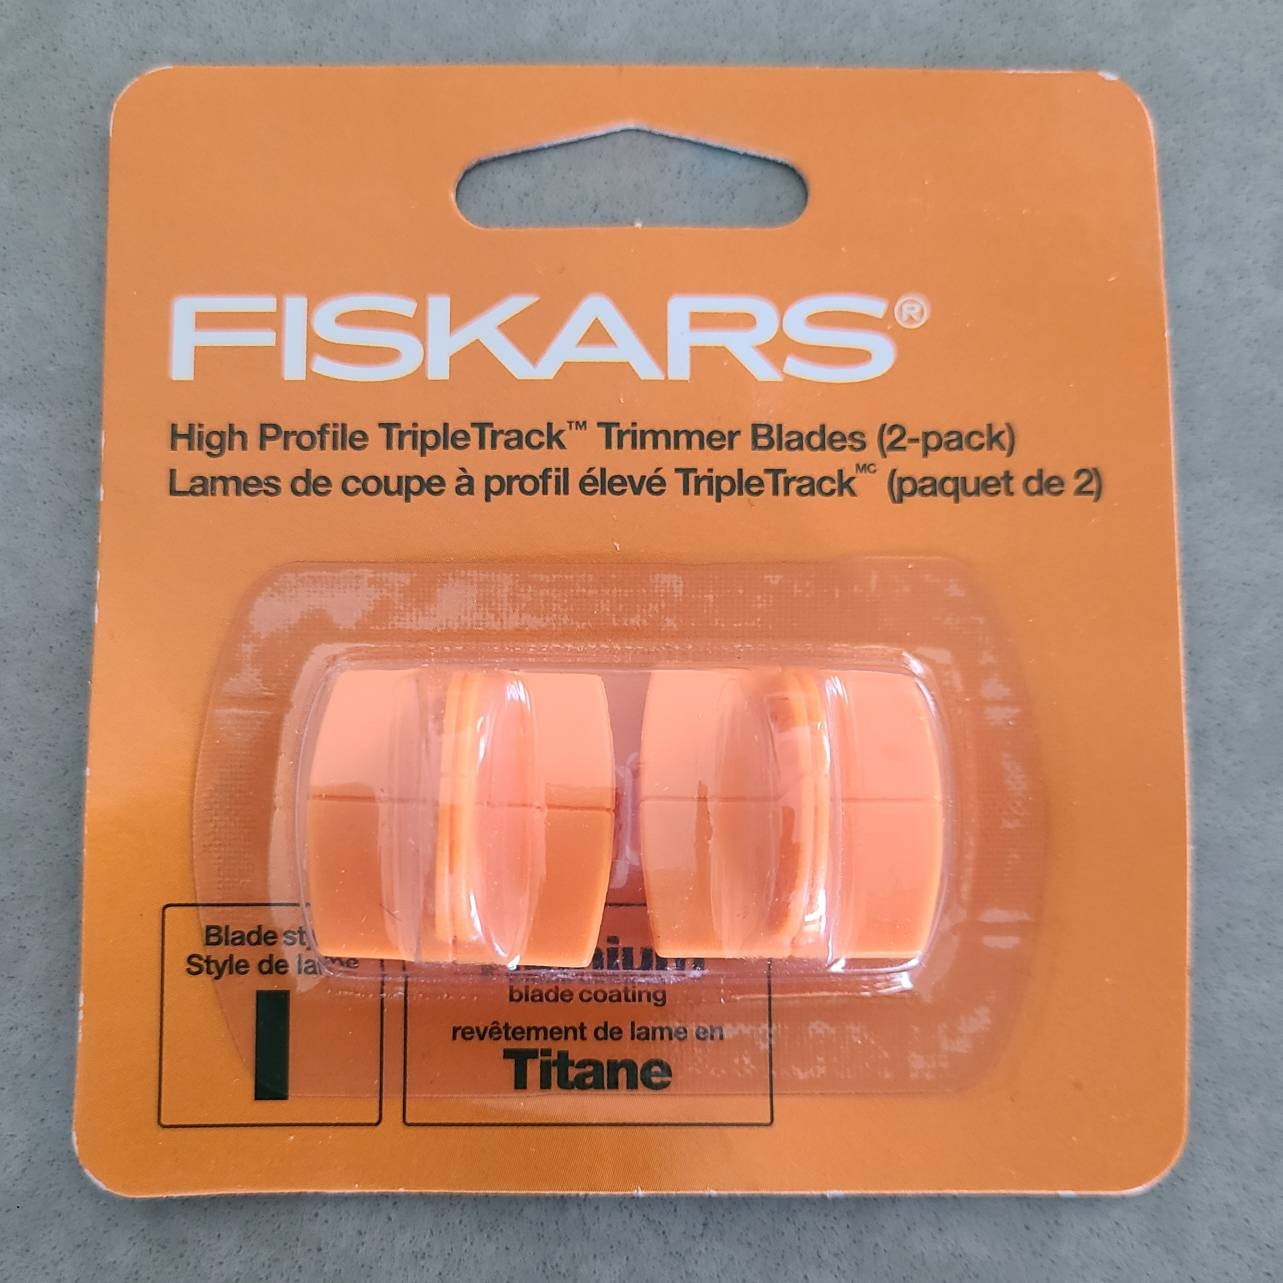 Fiskars 178130 45mm Rotary Cutter Tool With Extra Blades 